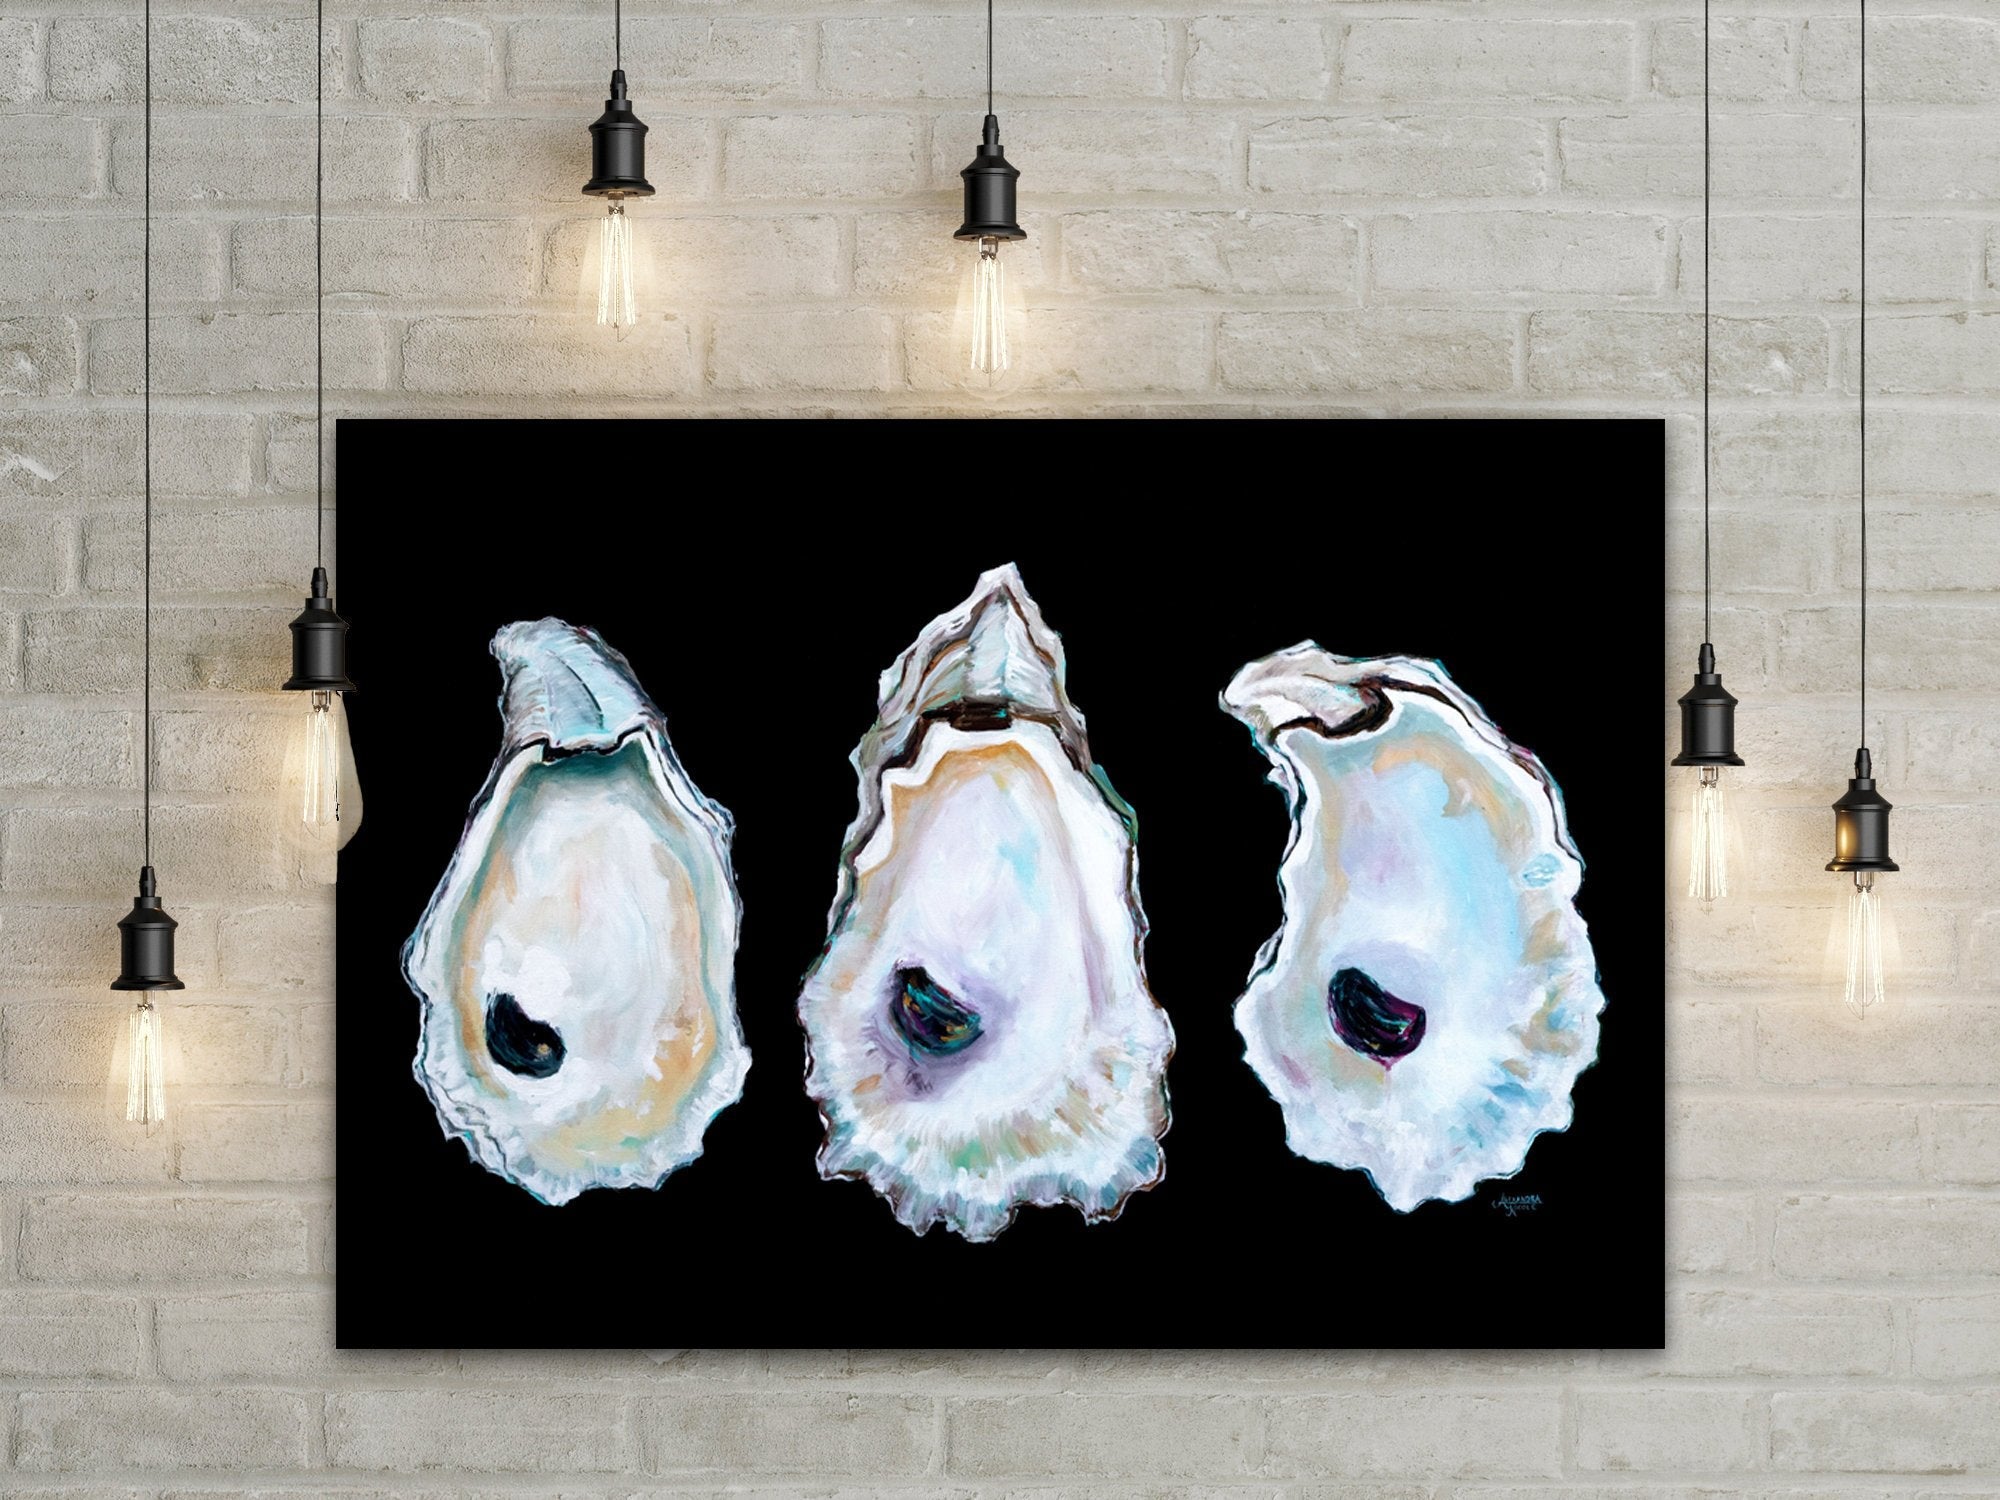 Oyster Shell Printed on Rolled Canvas - ArtByAlexandraNicole